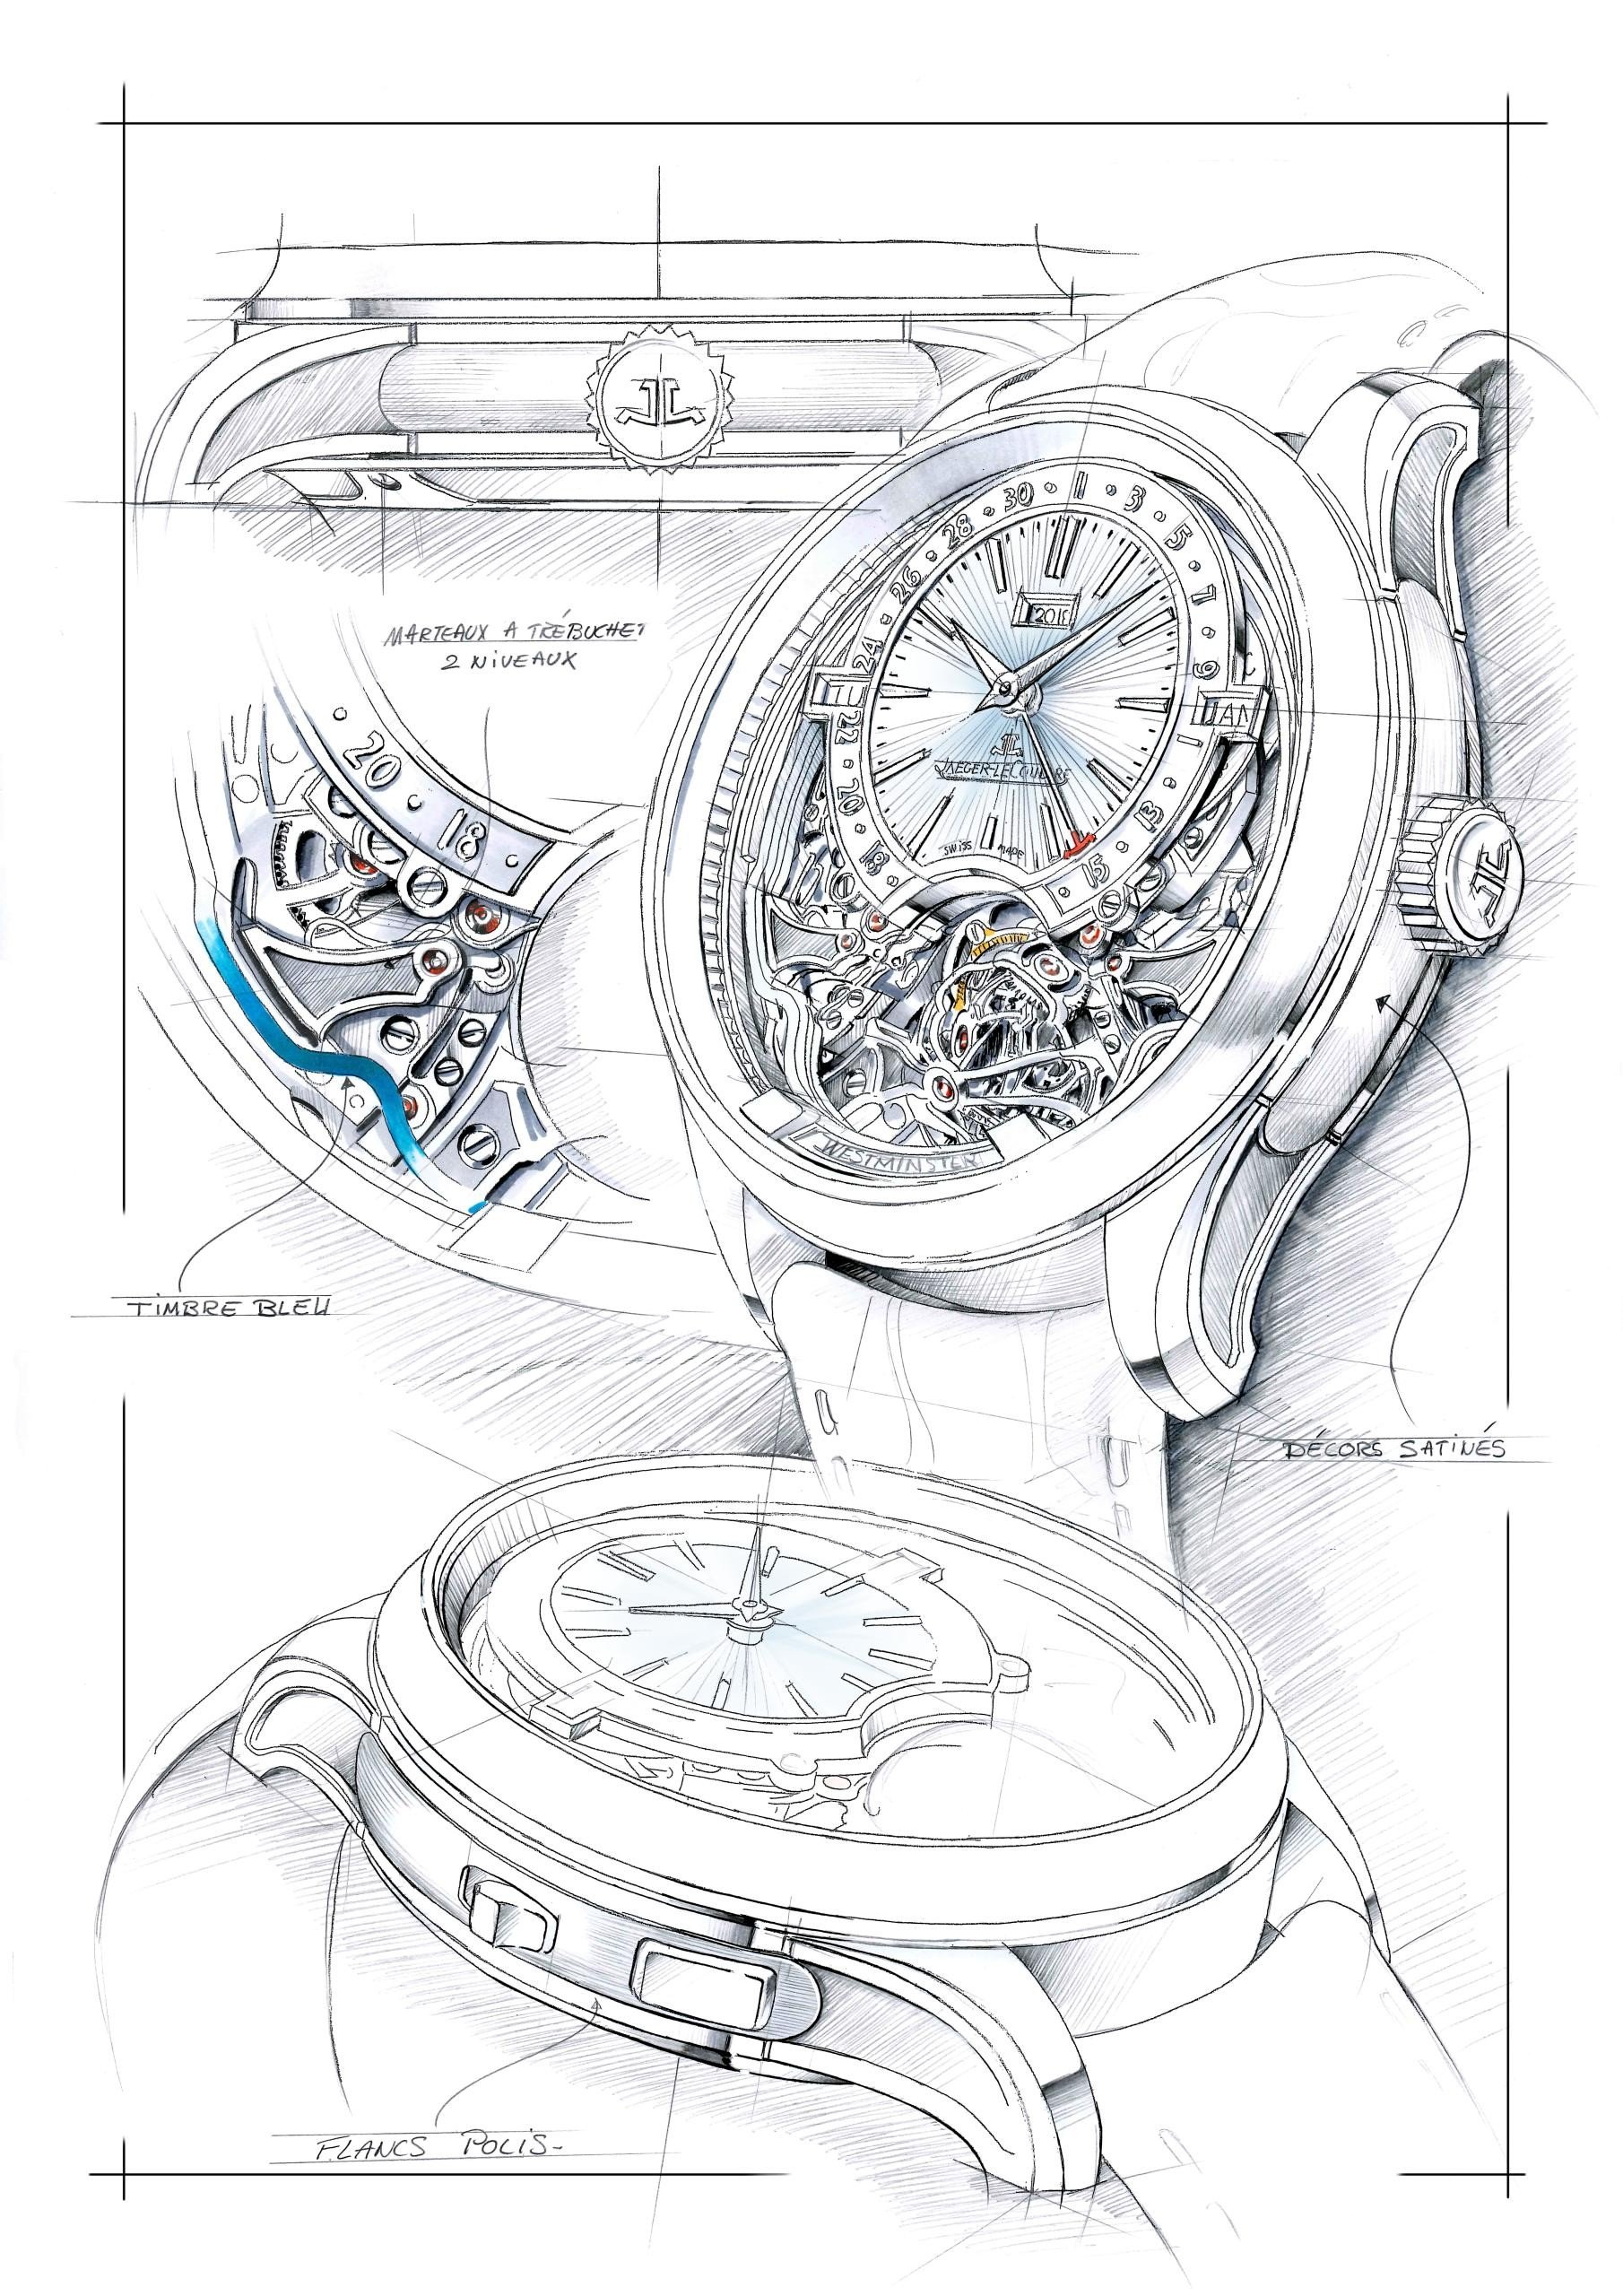 The Master Grande Tradition Gyrotourbillon Westminster Perpétuel by Jaeger-LeCoultre combines some of the most celebrated complications in watchmaking in a single movement.